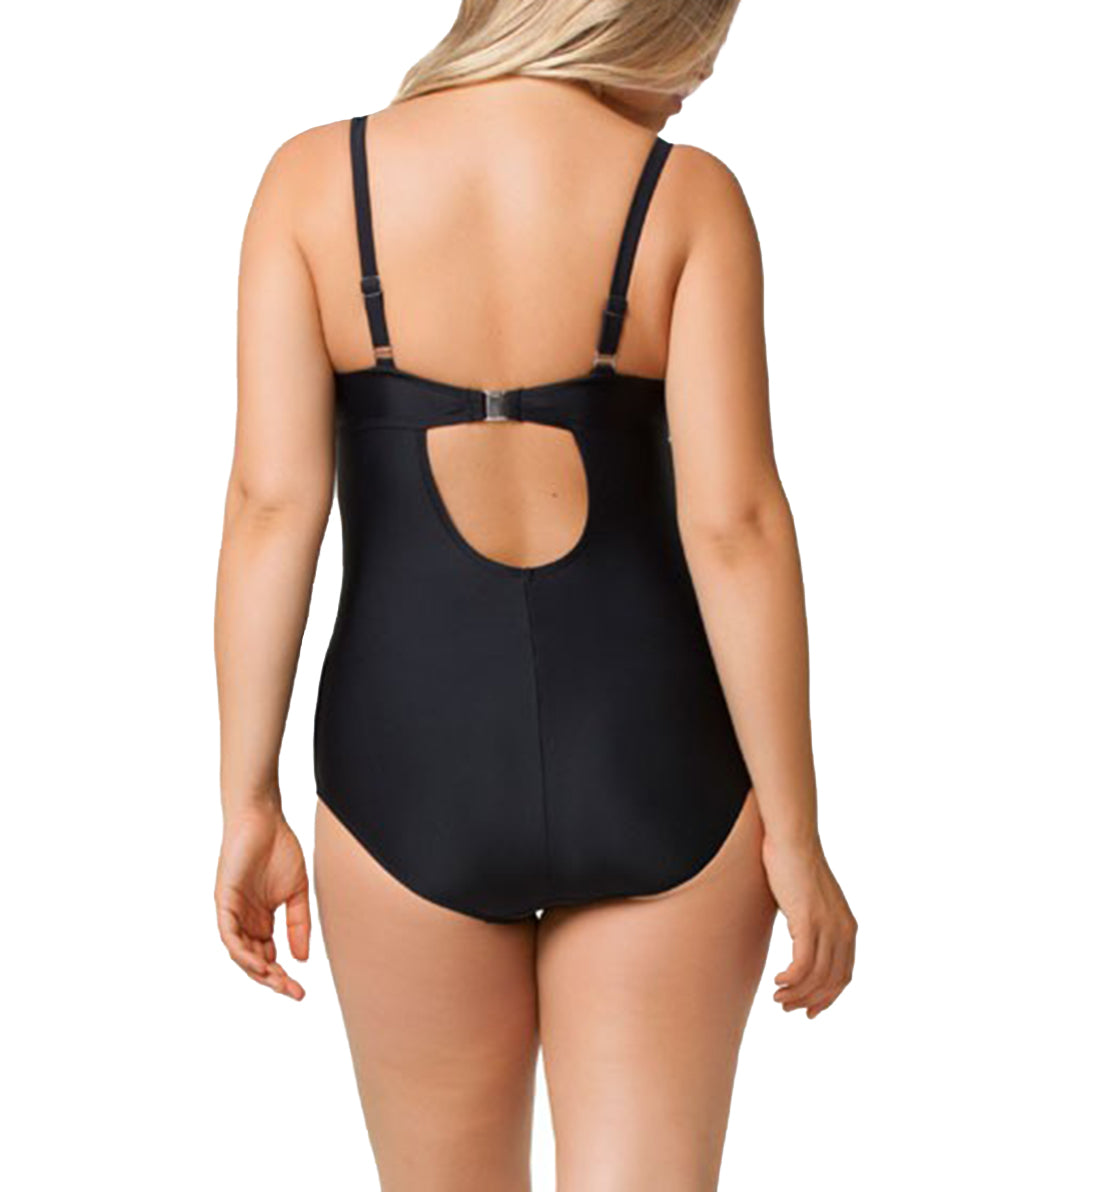 Rosewater by Cake Squash Maternity / Nursing 1pc. Swimsuit (61-5052),Small B-DD Cups,Black - Black,Small